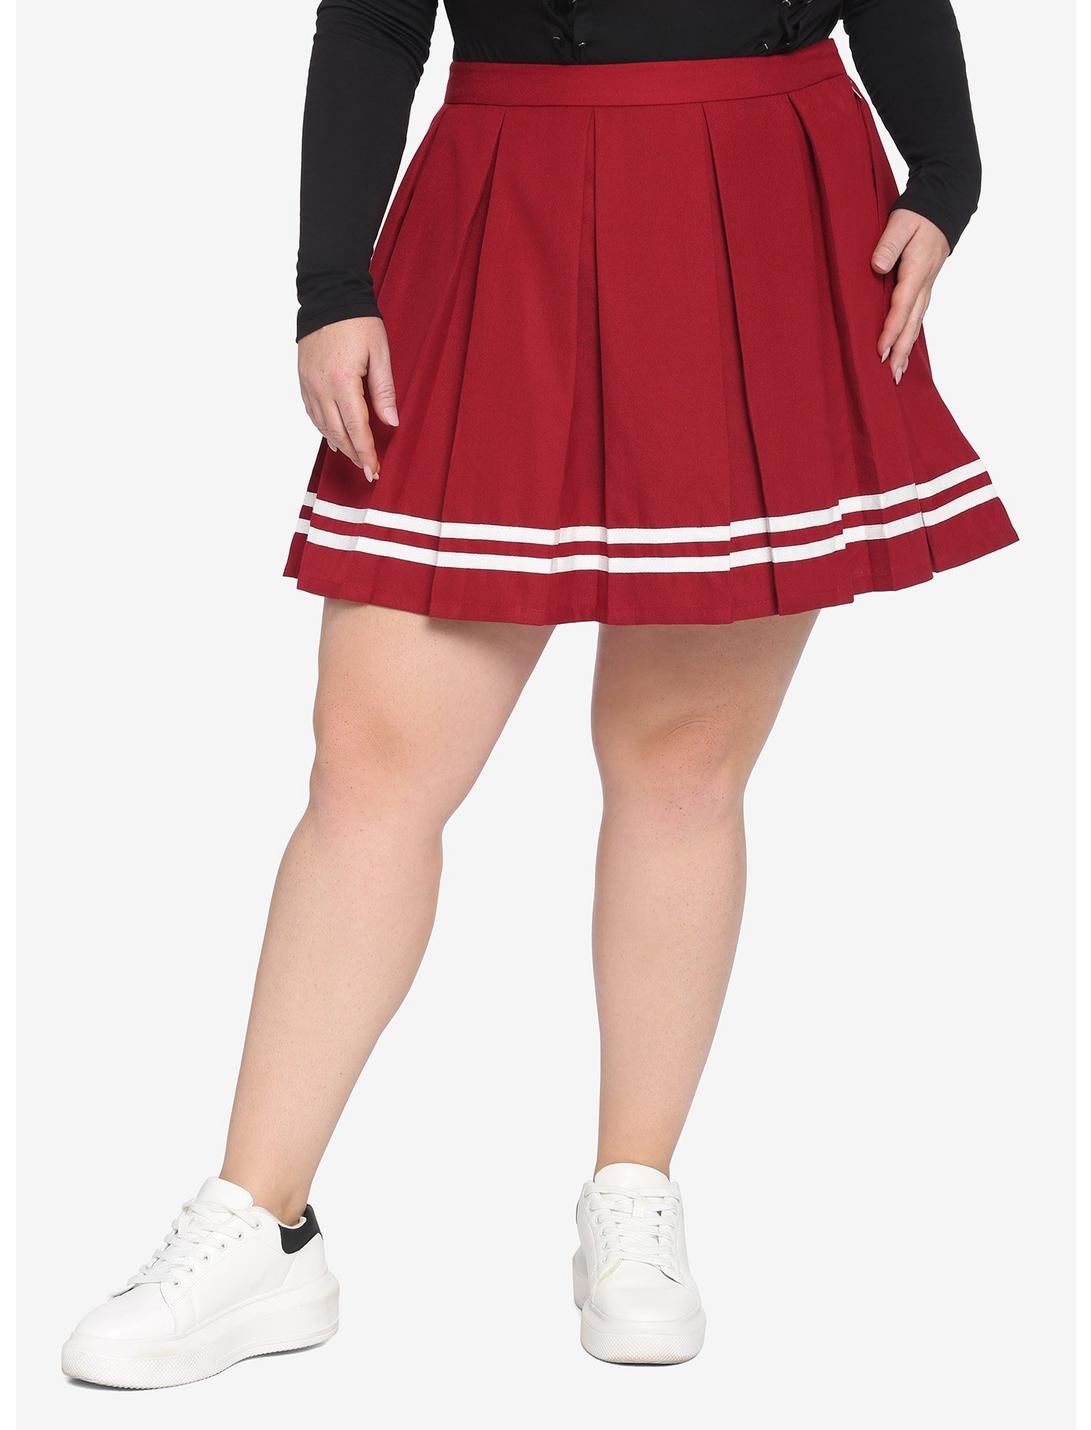 Red Pleated Cheer Skirt Plus Size, BIKING RED, hi-res